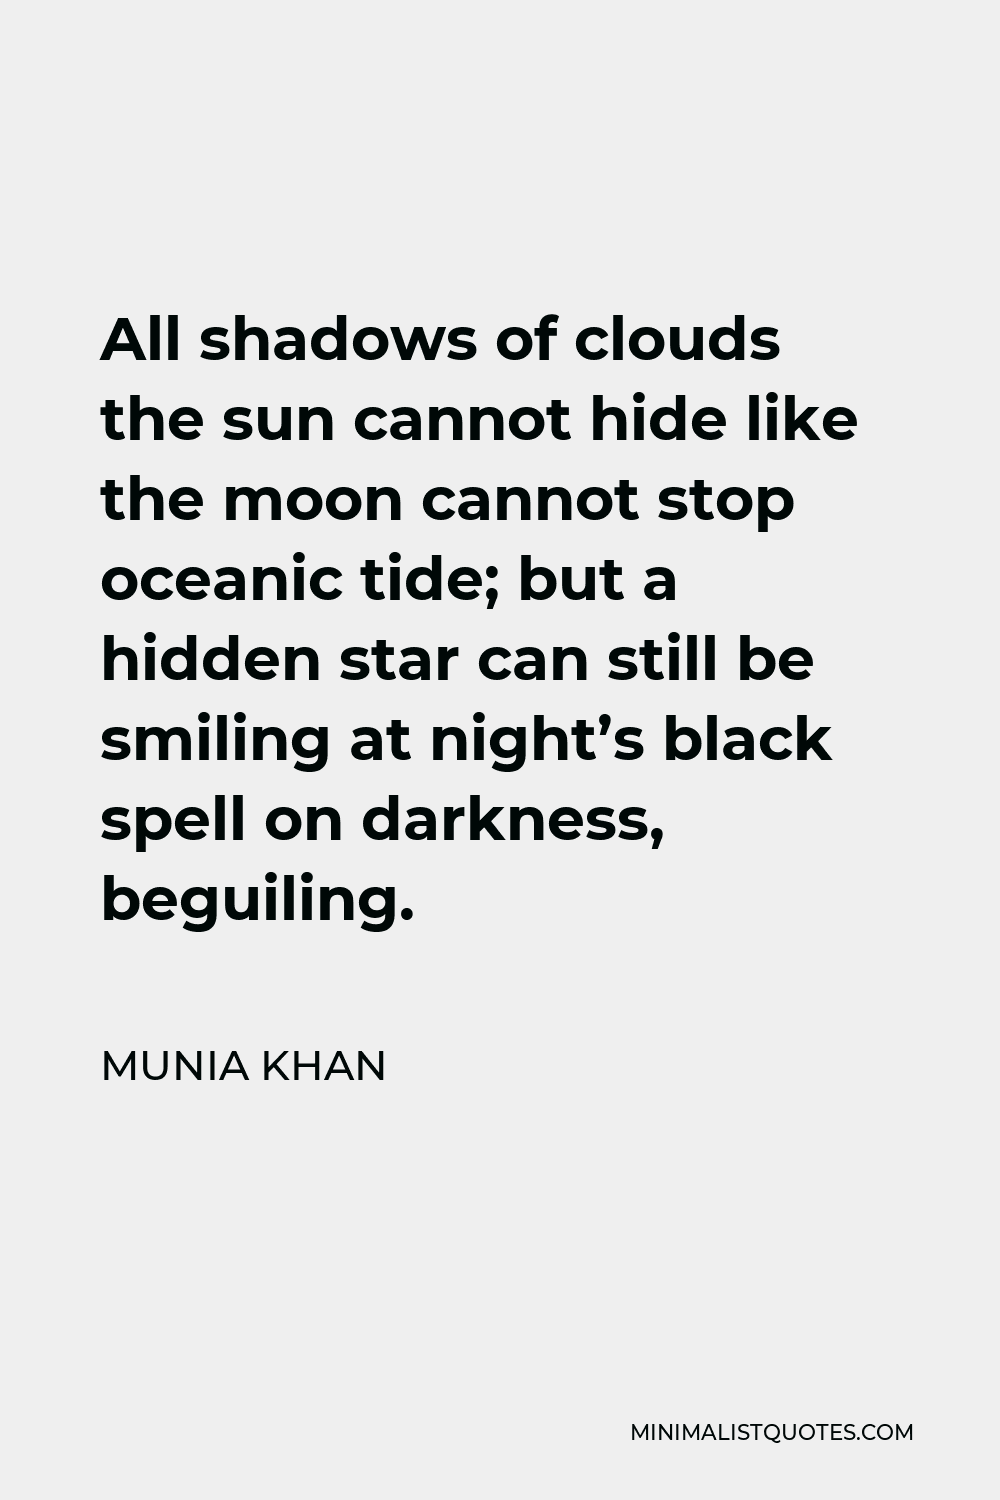 Munia Khan Quote - All shadows of clouds the sun cannot hide like the moon cannot stop oceanic tide; but a hidden star can still be smiling at night’s black spell on darkness, beguiling.